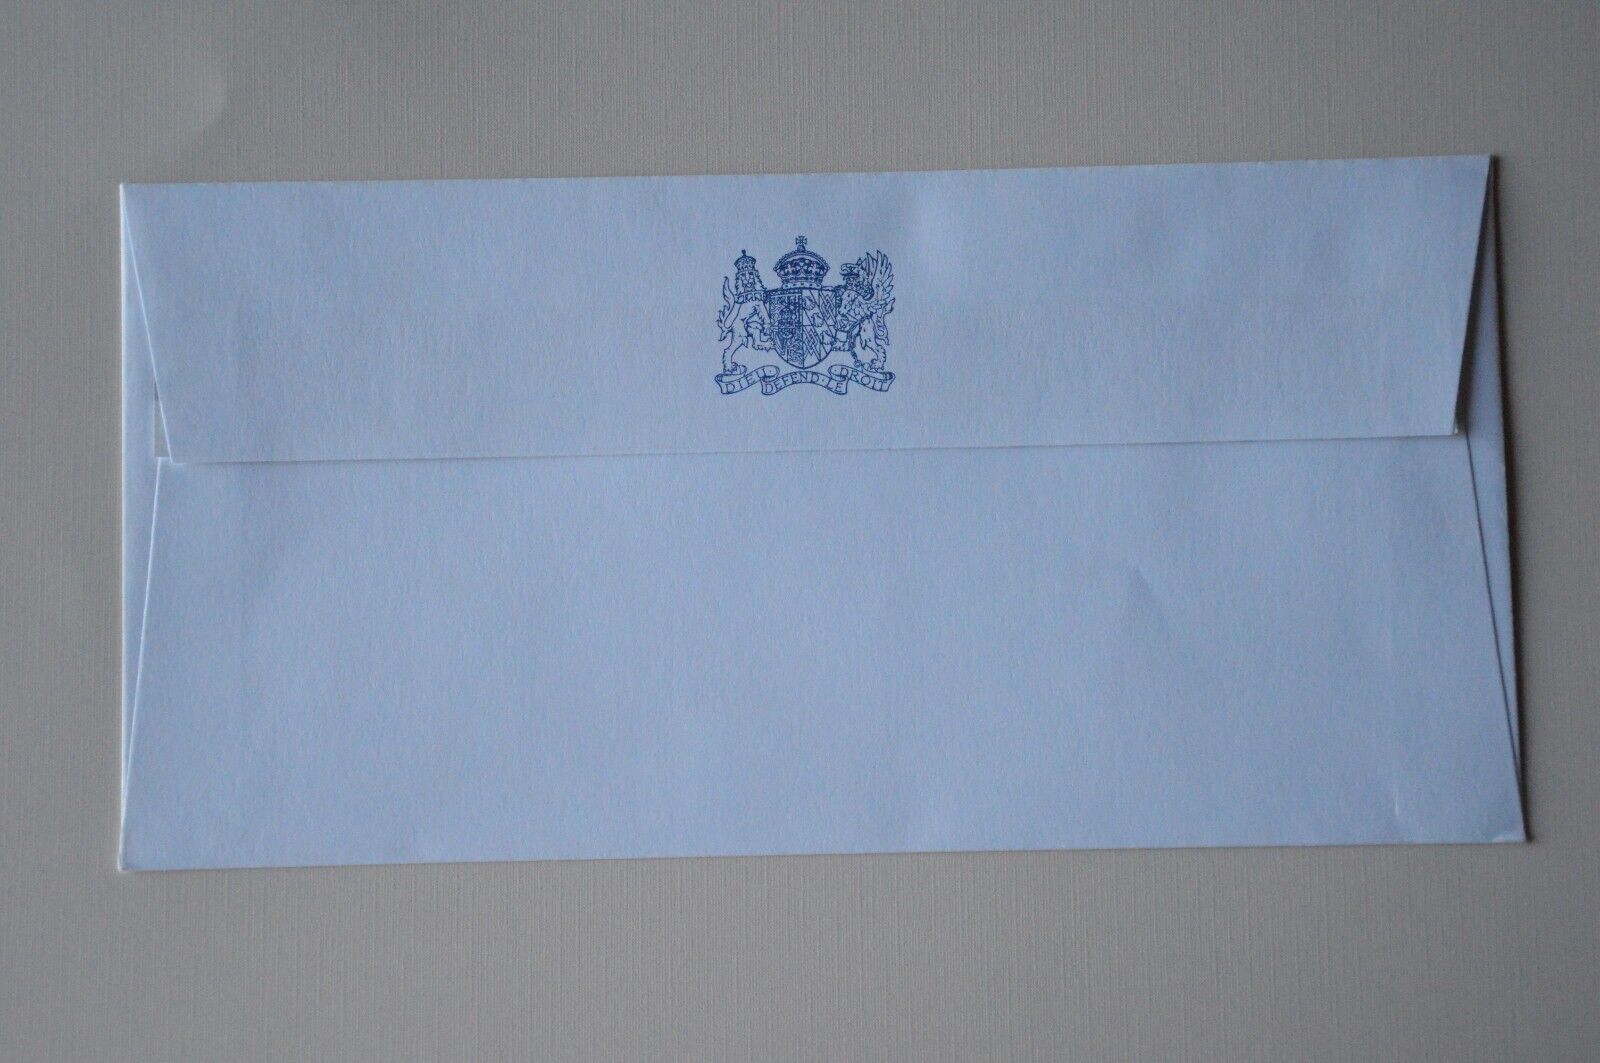 Diana Princess of Wales Stationary Envelope Coat of Arms Before Divorce 1981-96'